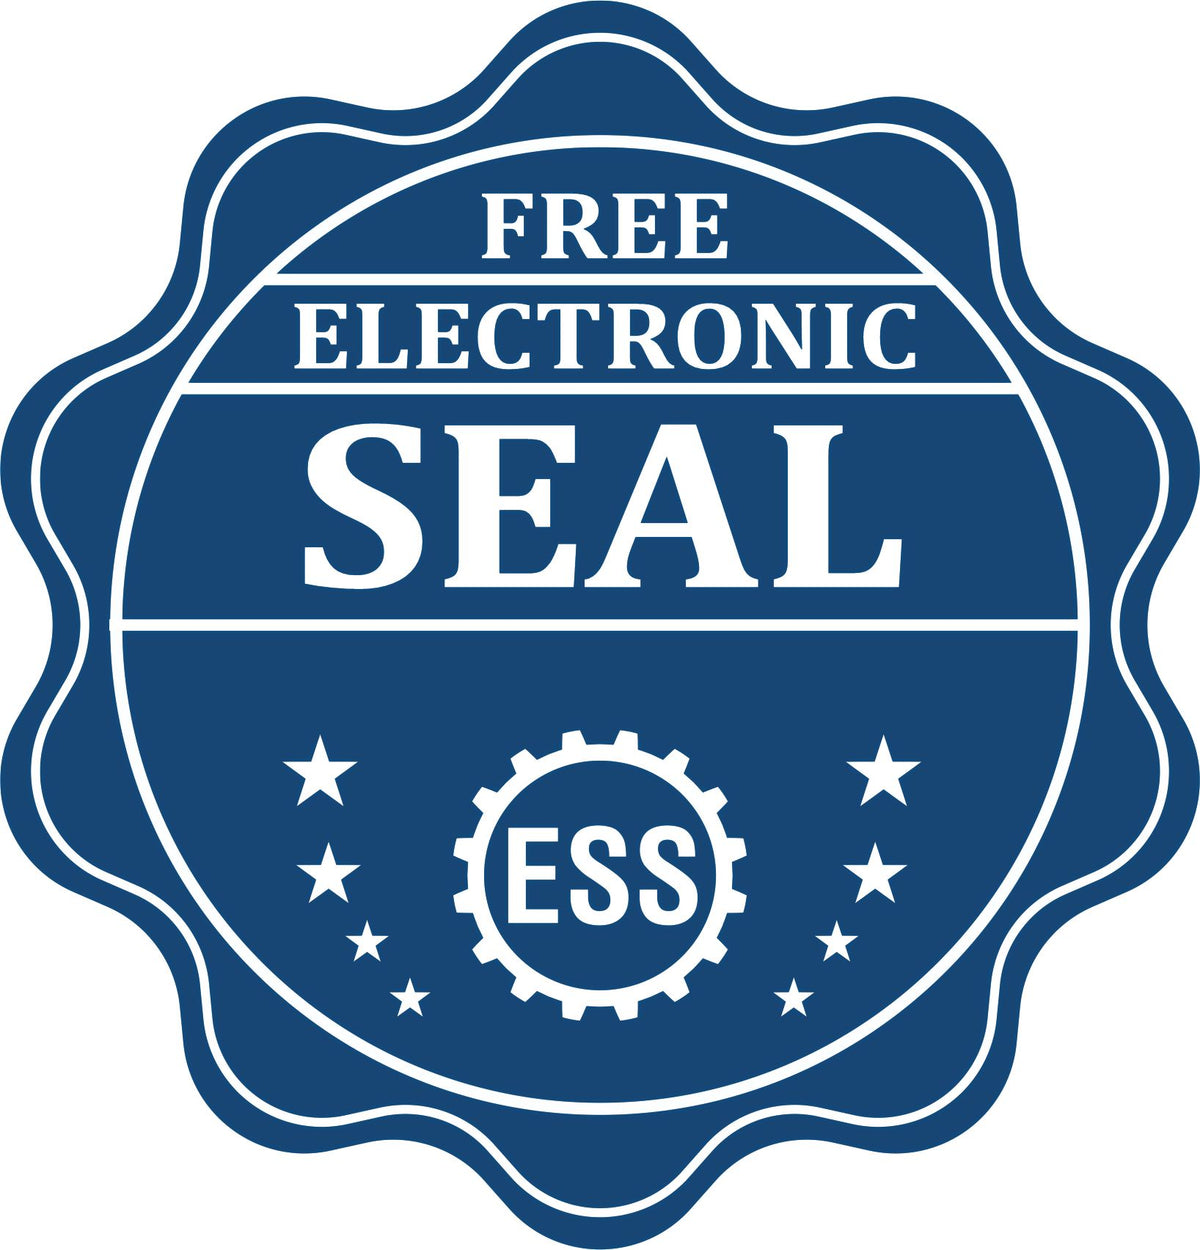 A badge showing a free electronic seal for the Missouri Geologist Desk Seal with stars and the ESS gear on the emblem.